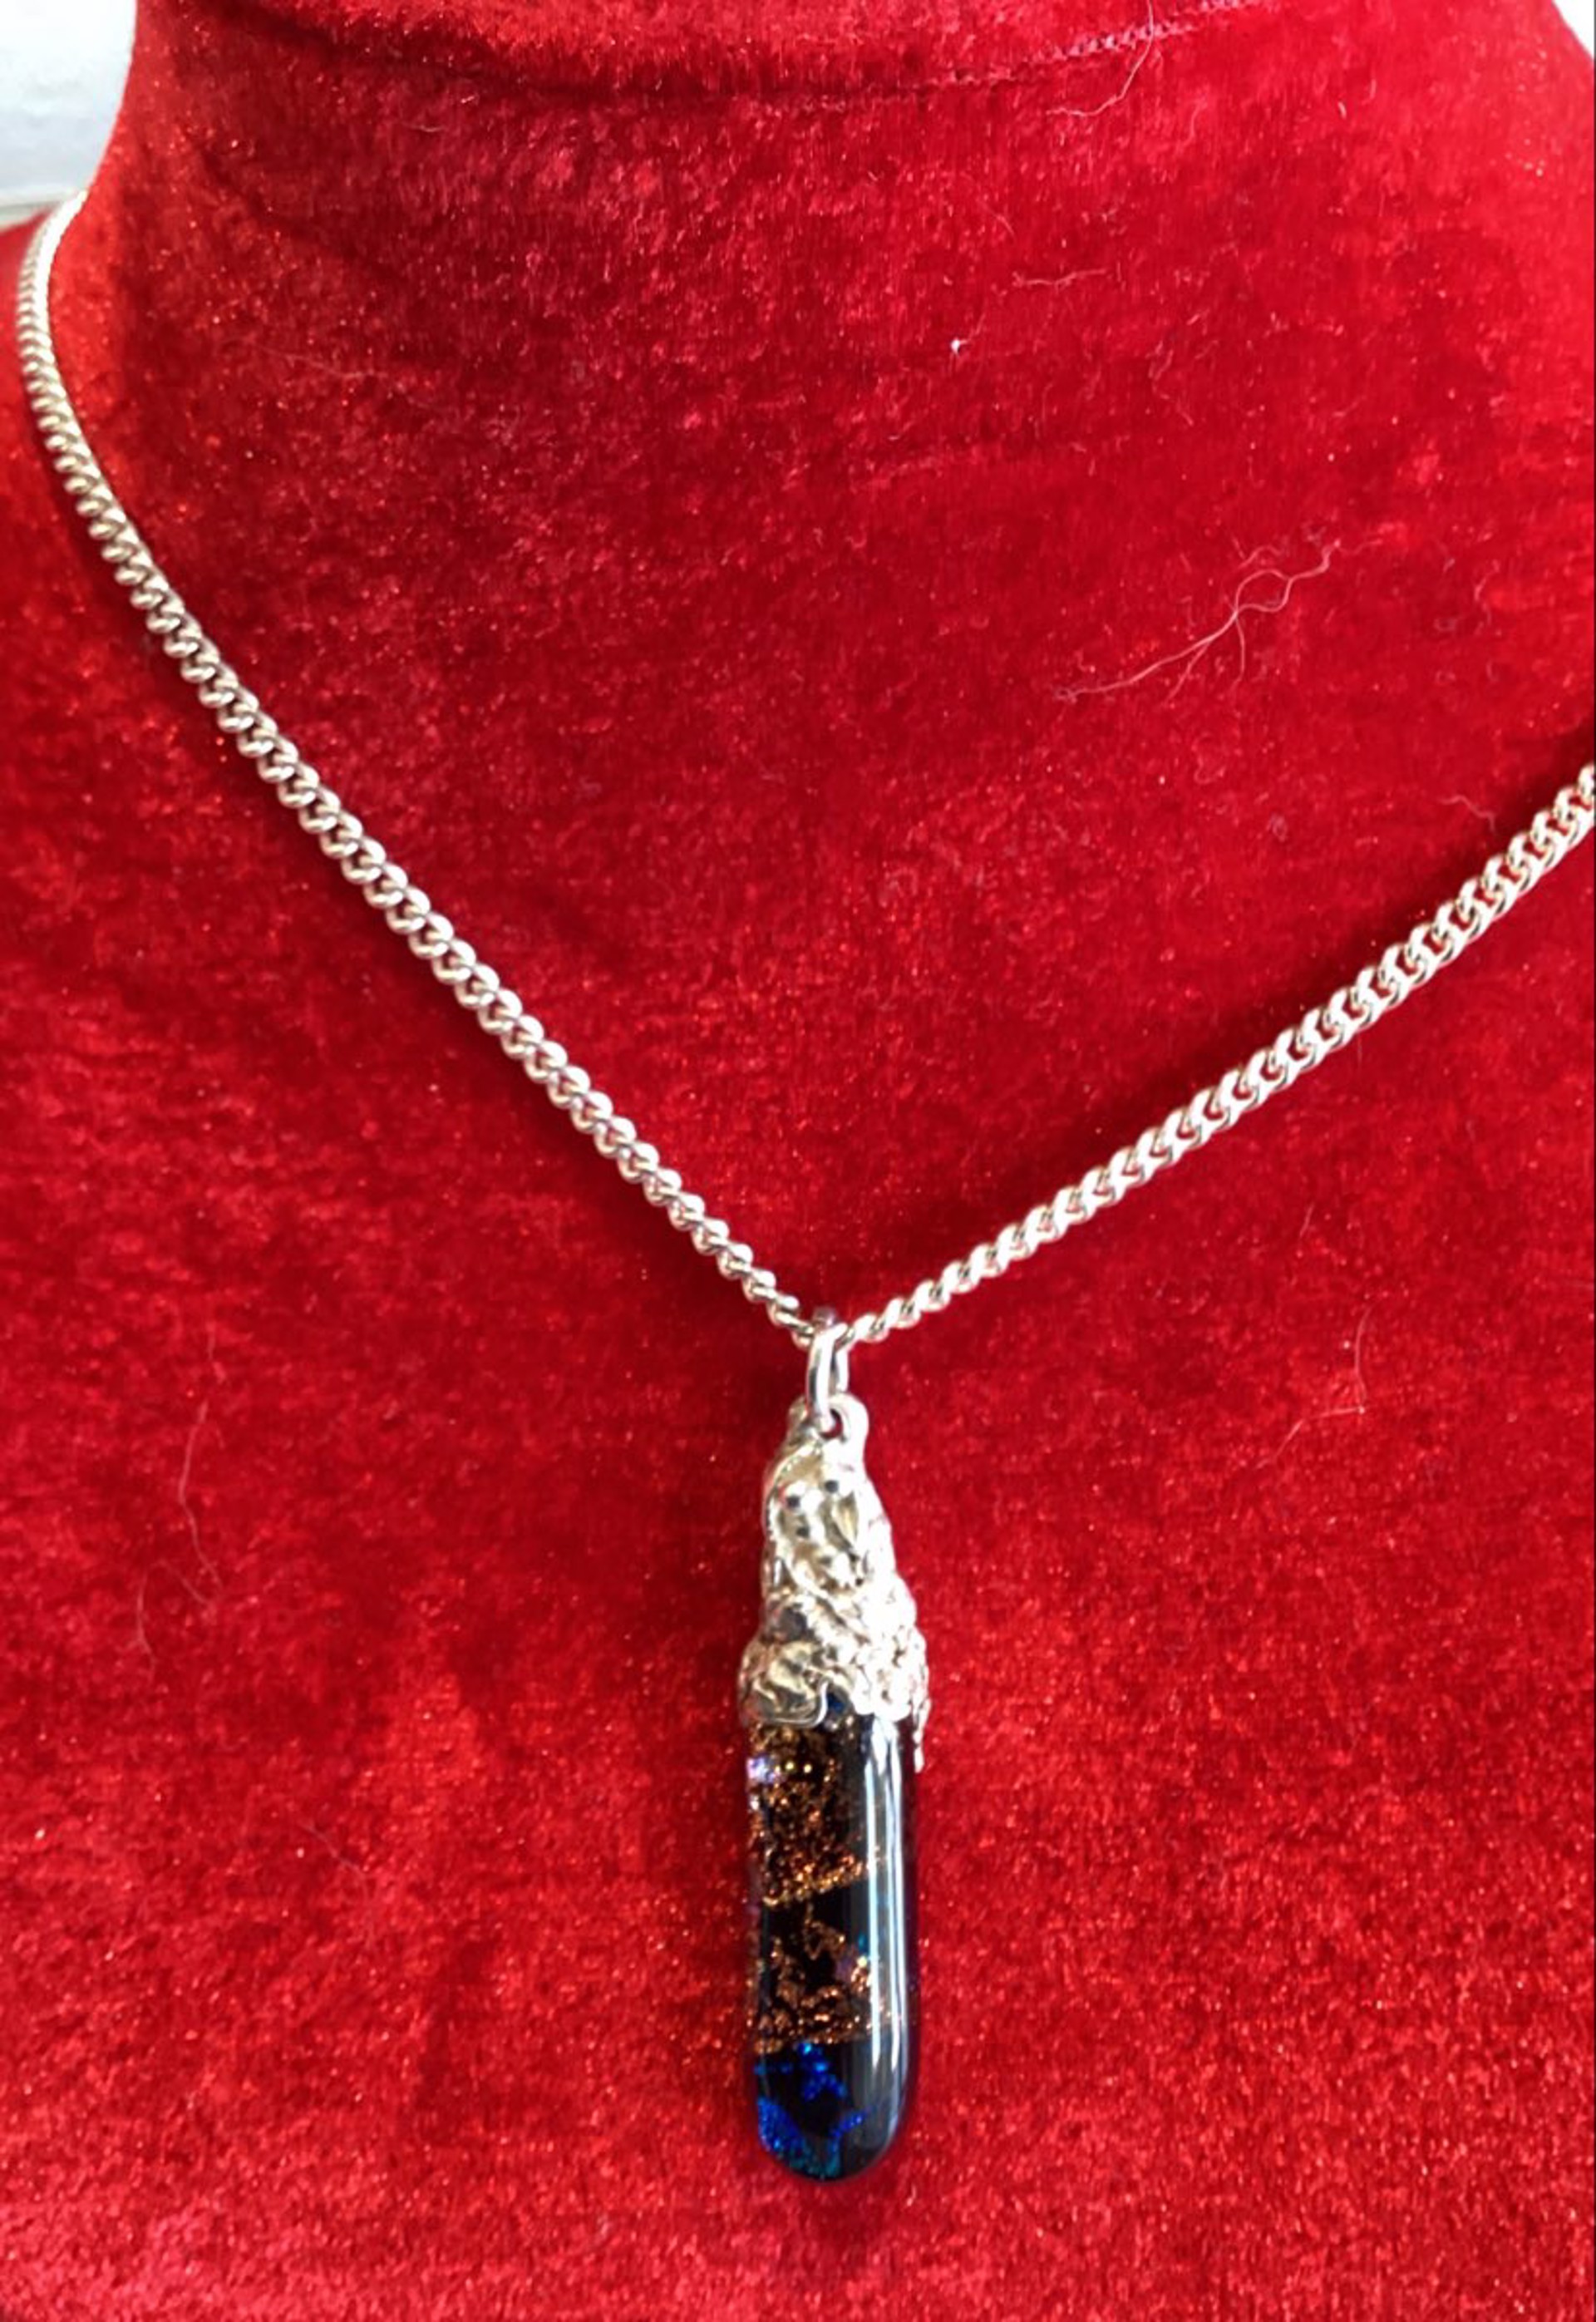 Dichroic Glass Pendant W/Pure Silver Cap   W/28in Sterling Silver Chain by Mauzey